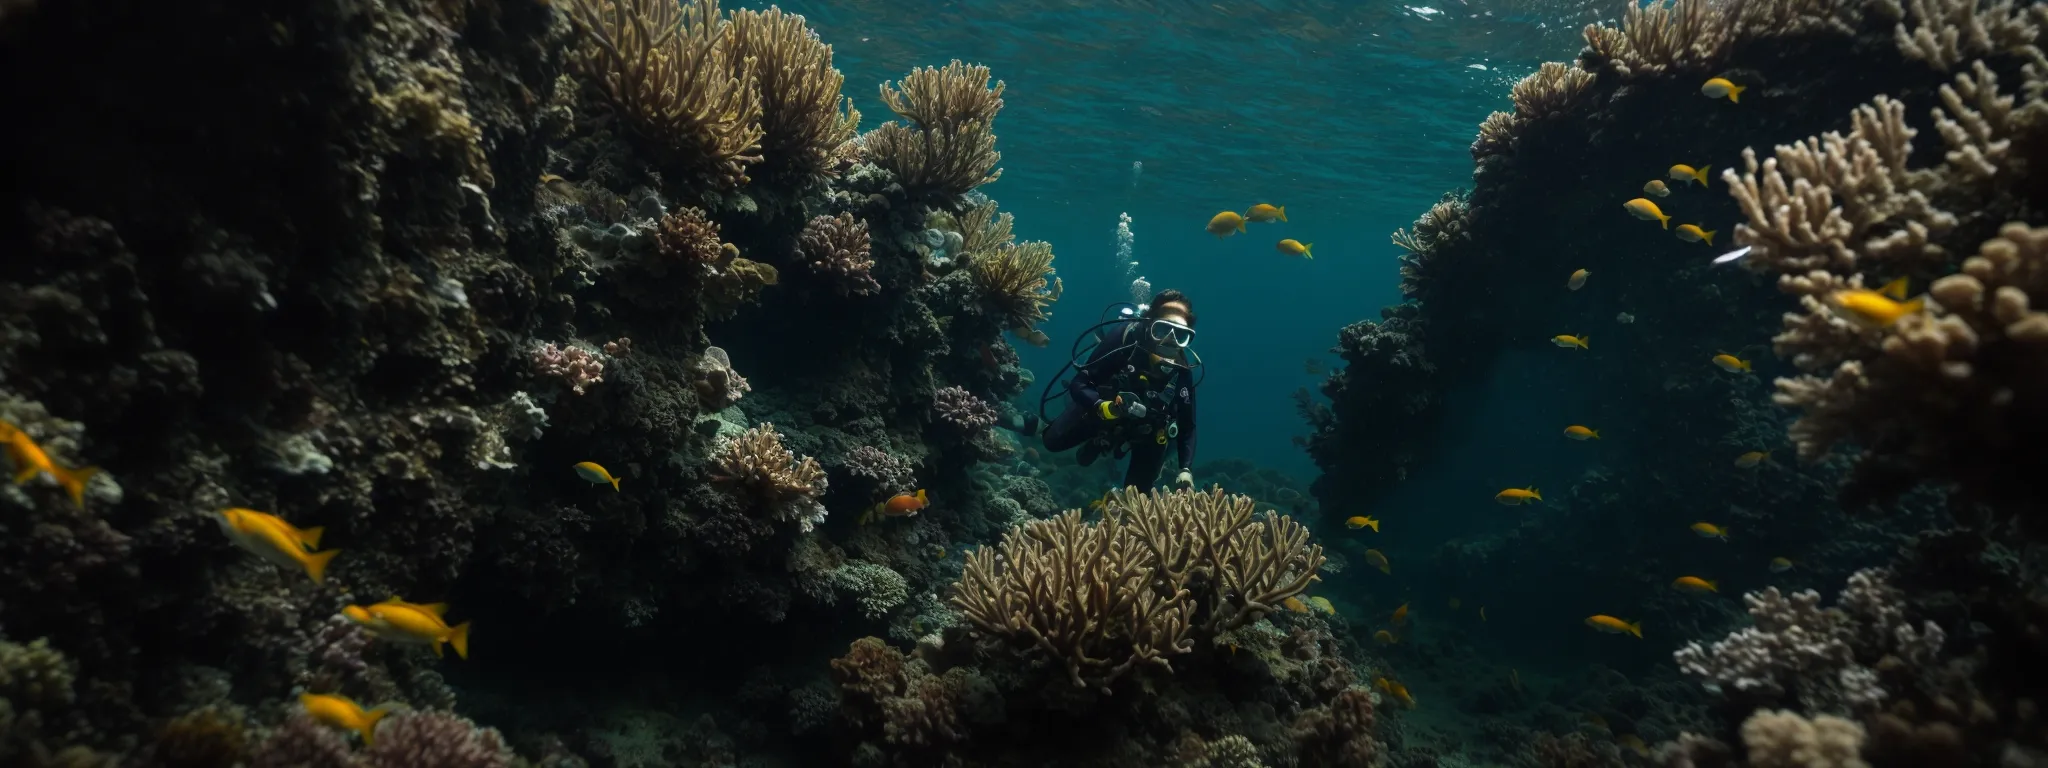 a diver exploring a deep underwater coral network.